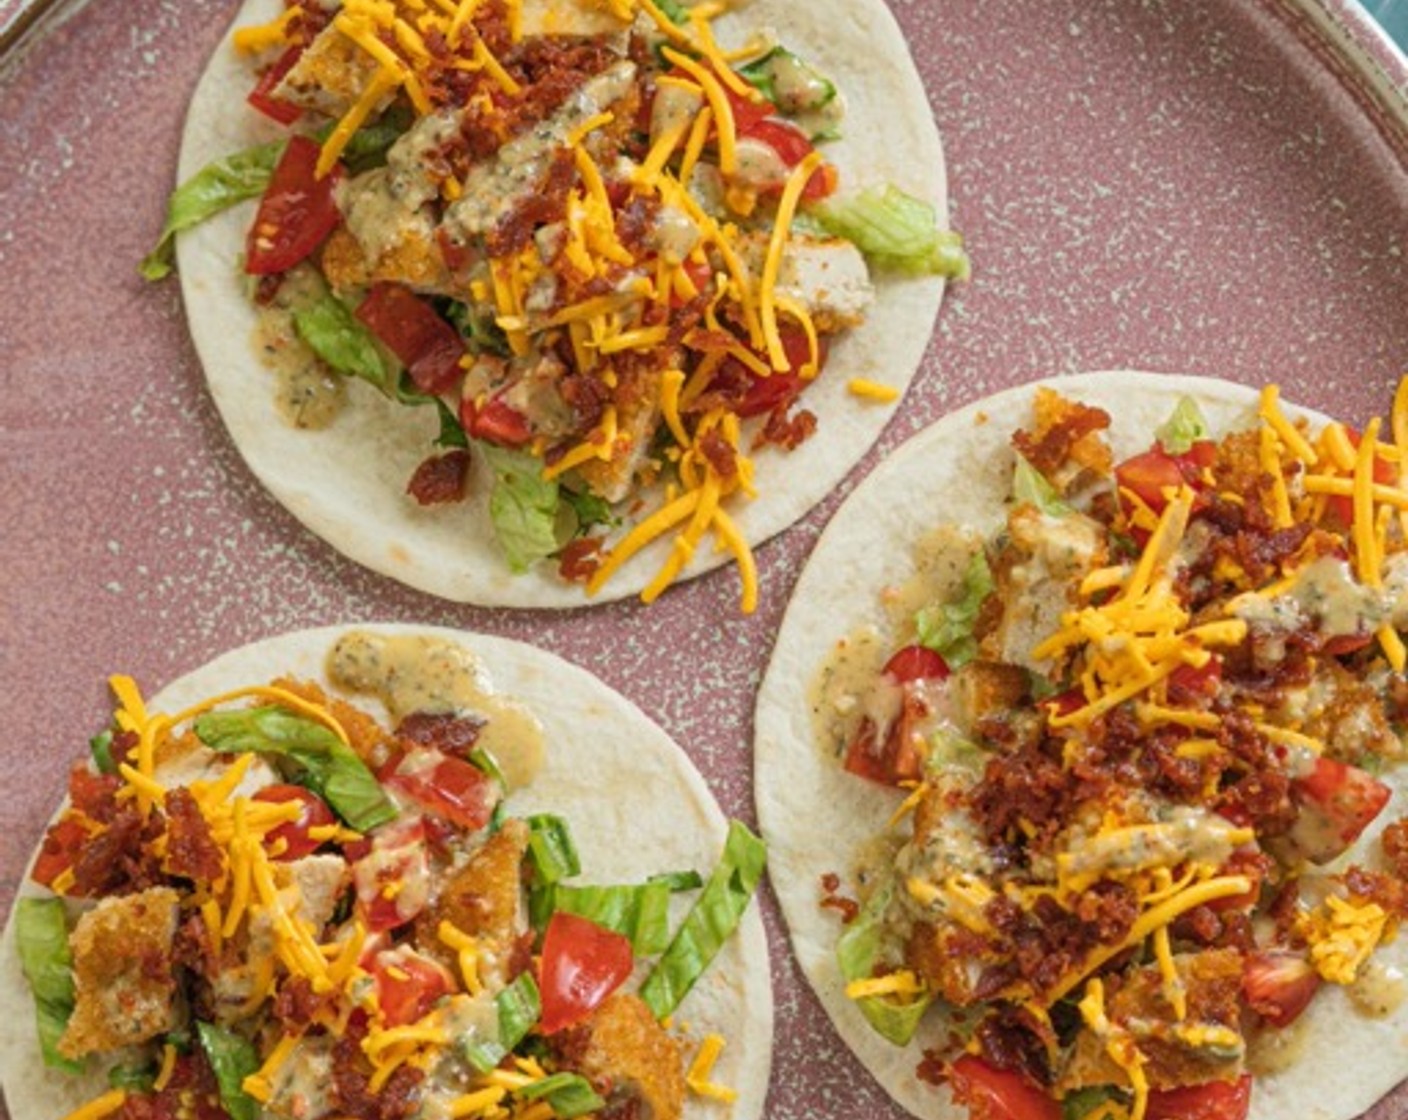 step 2 Top tortillas with Vegan Chicken Strips (2 1/2 cups), Vegan Cheddar Cheese (1 cup), Roma Tomatoes (2), Vegan Bacon (8 slices), Lettuce (1 1/2 cups), and drizzle with Vegan Ranch Dressing (1/4 cup).